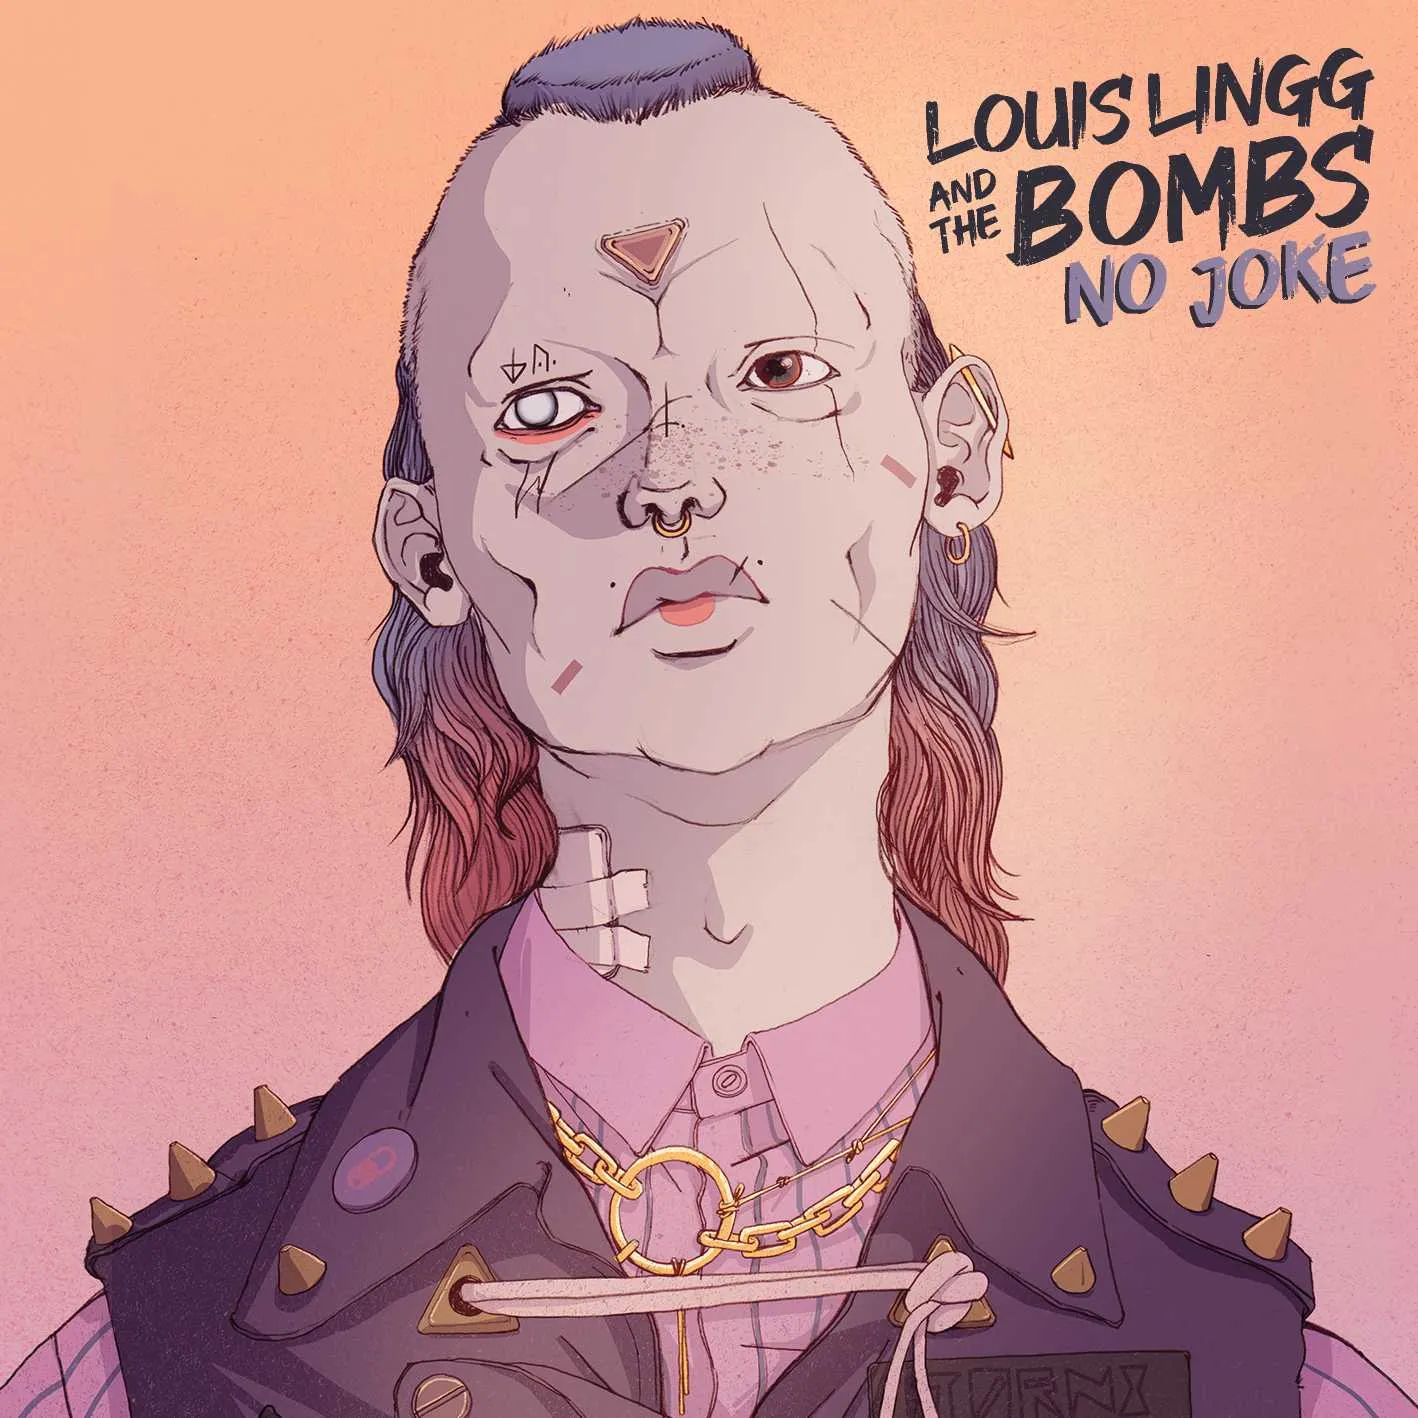 Album cover for “No Joke” by Louis Lingg and The Bombs